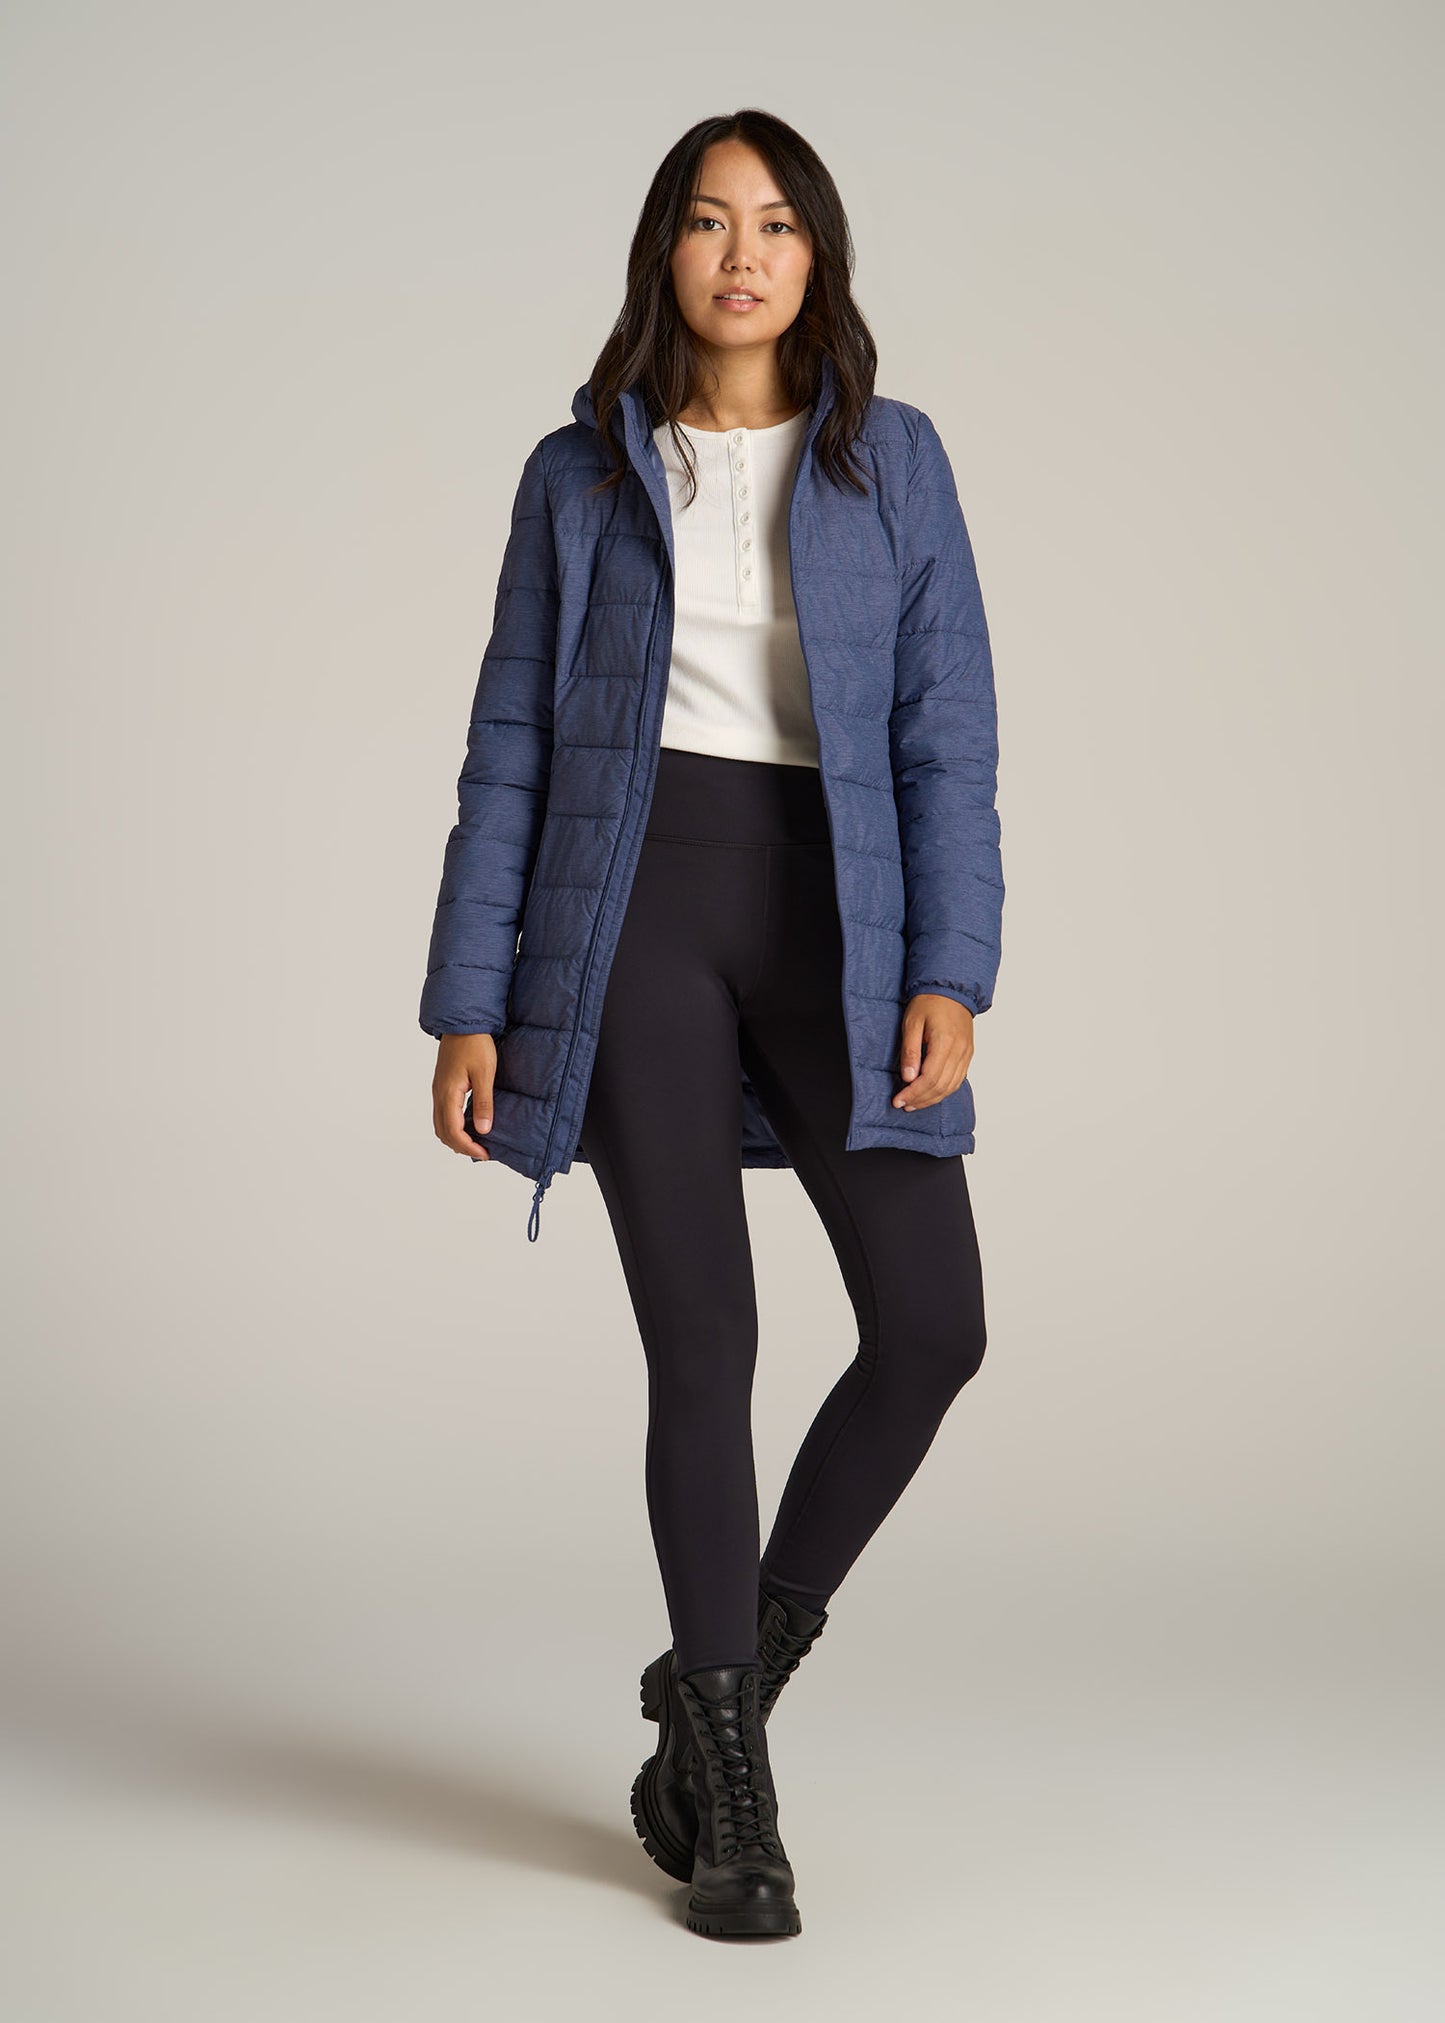 A tall woman wearing American Tall's Packable Puffer Jacket for Tall Women in Blue Space Dye.